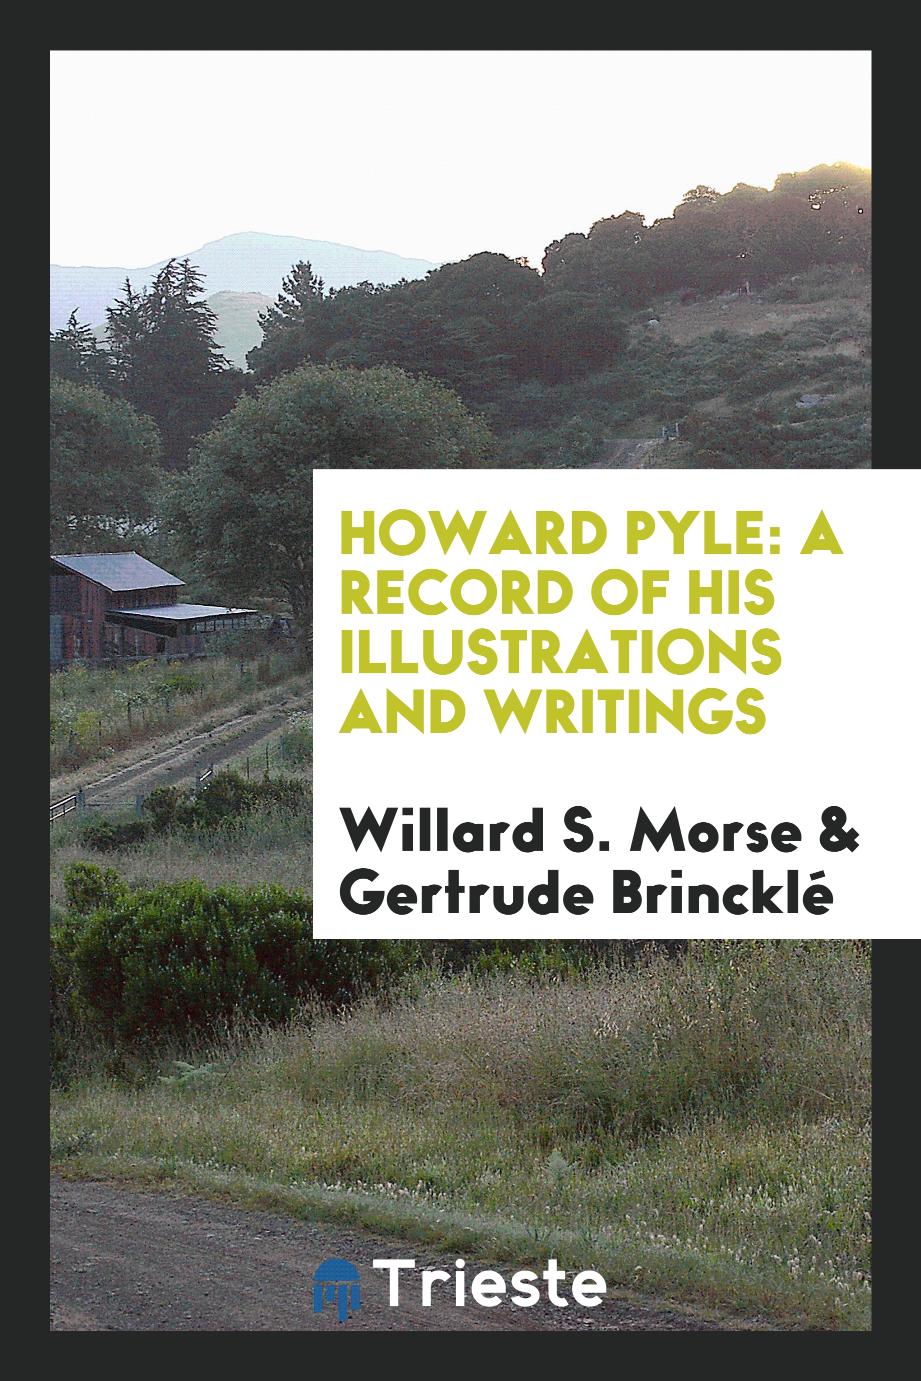 Howard Pyle: A Record of His Illustrations and Writings